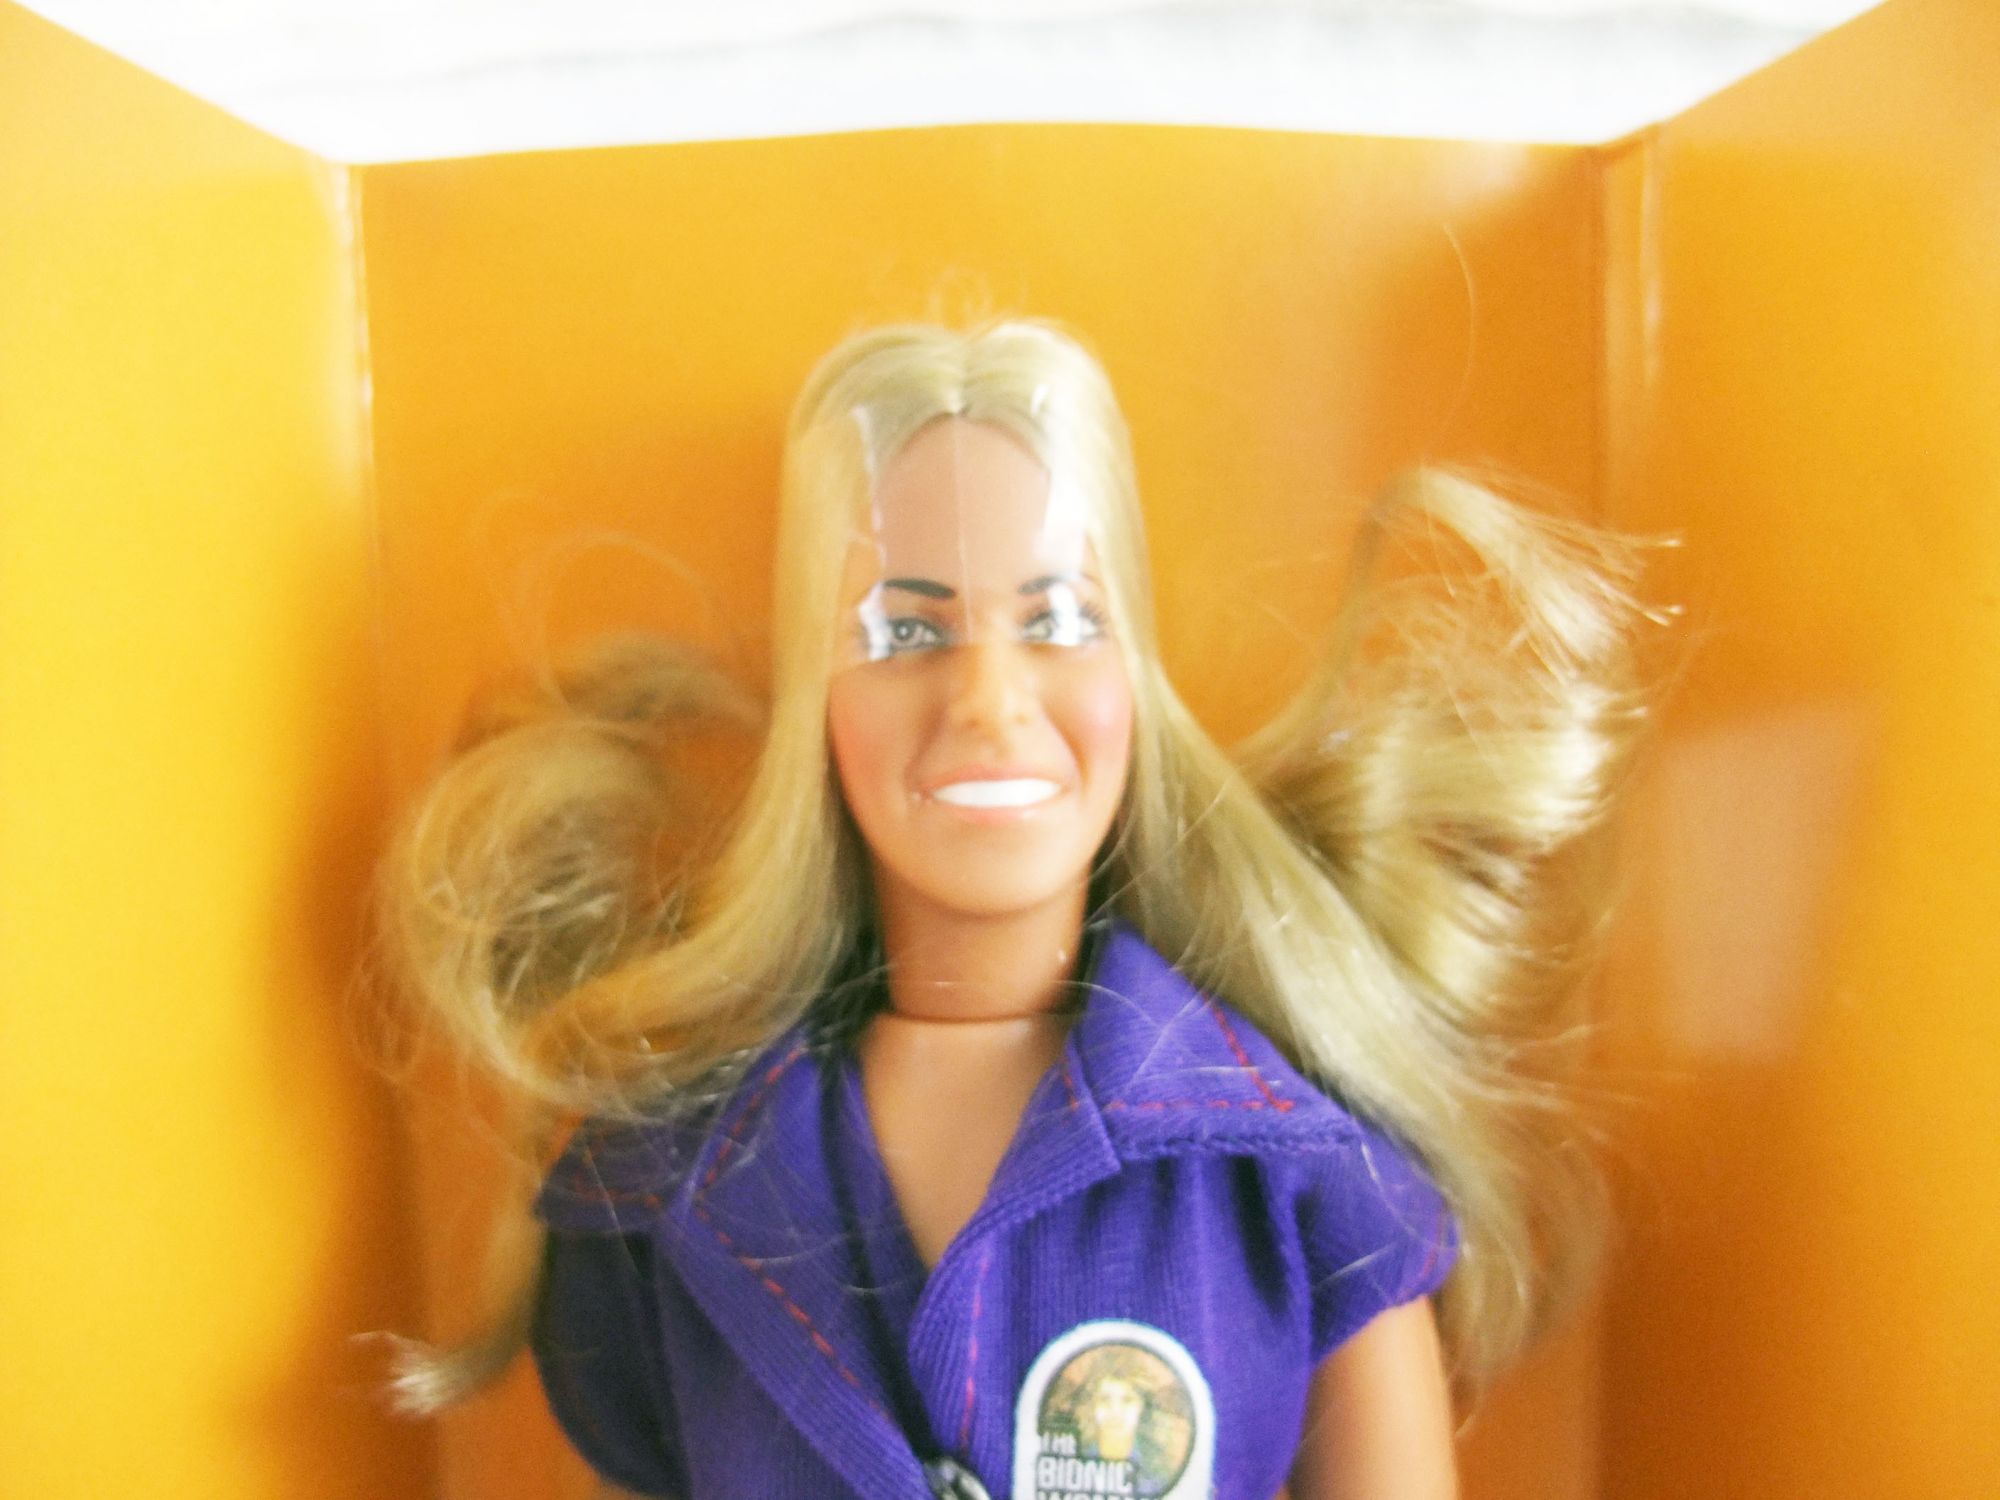 The Bionic Woman doll in box, with original clothes and mission